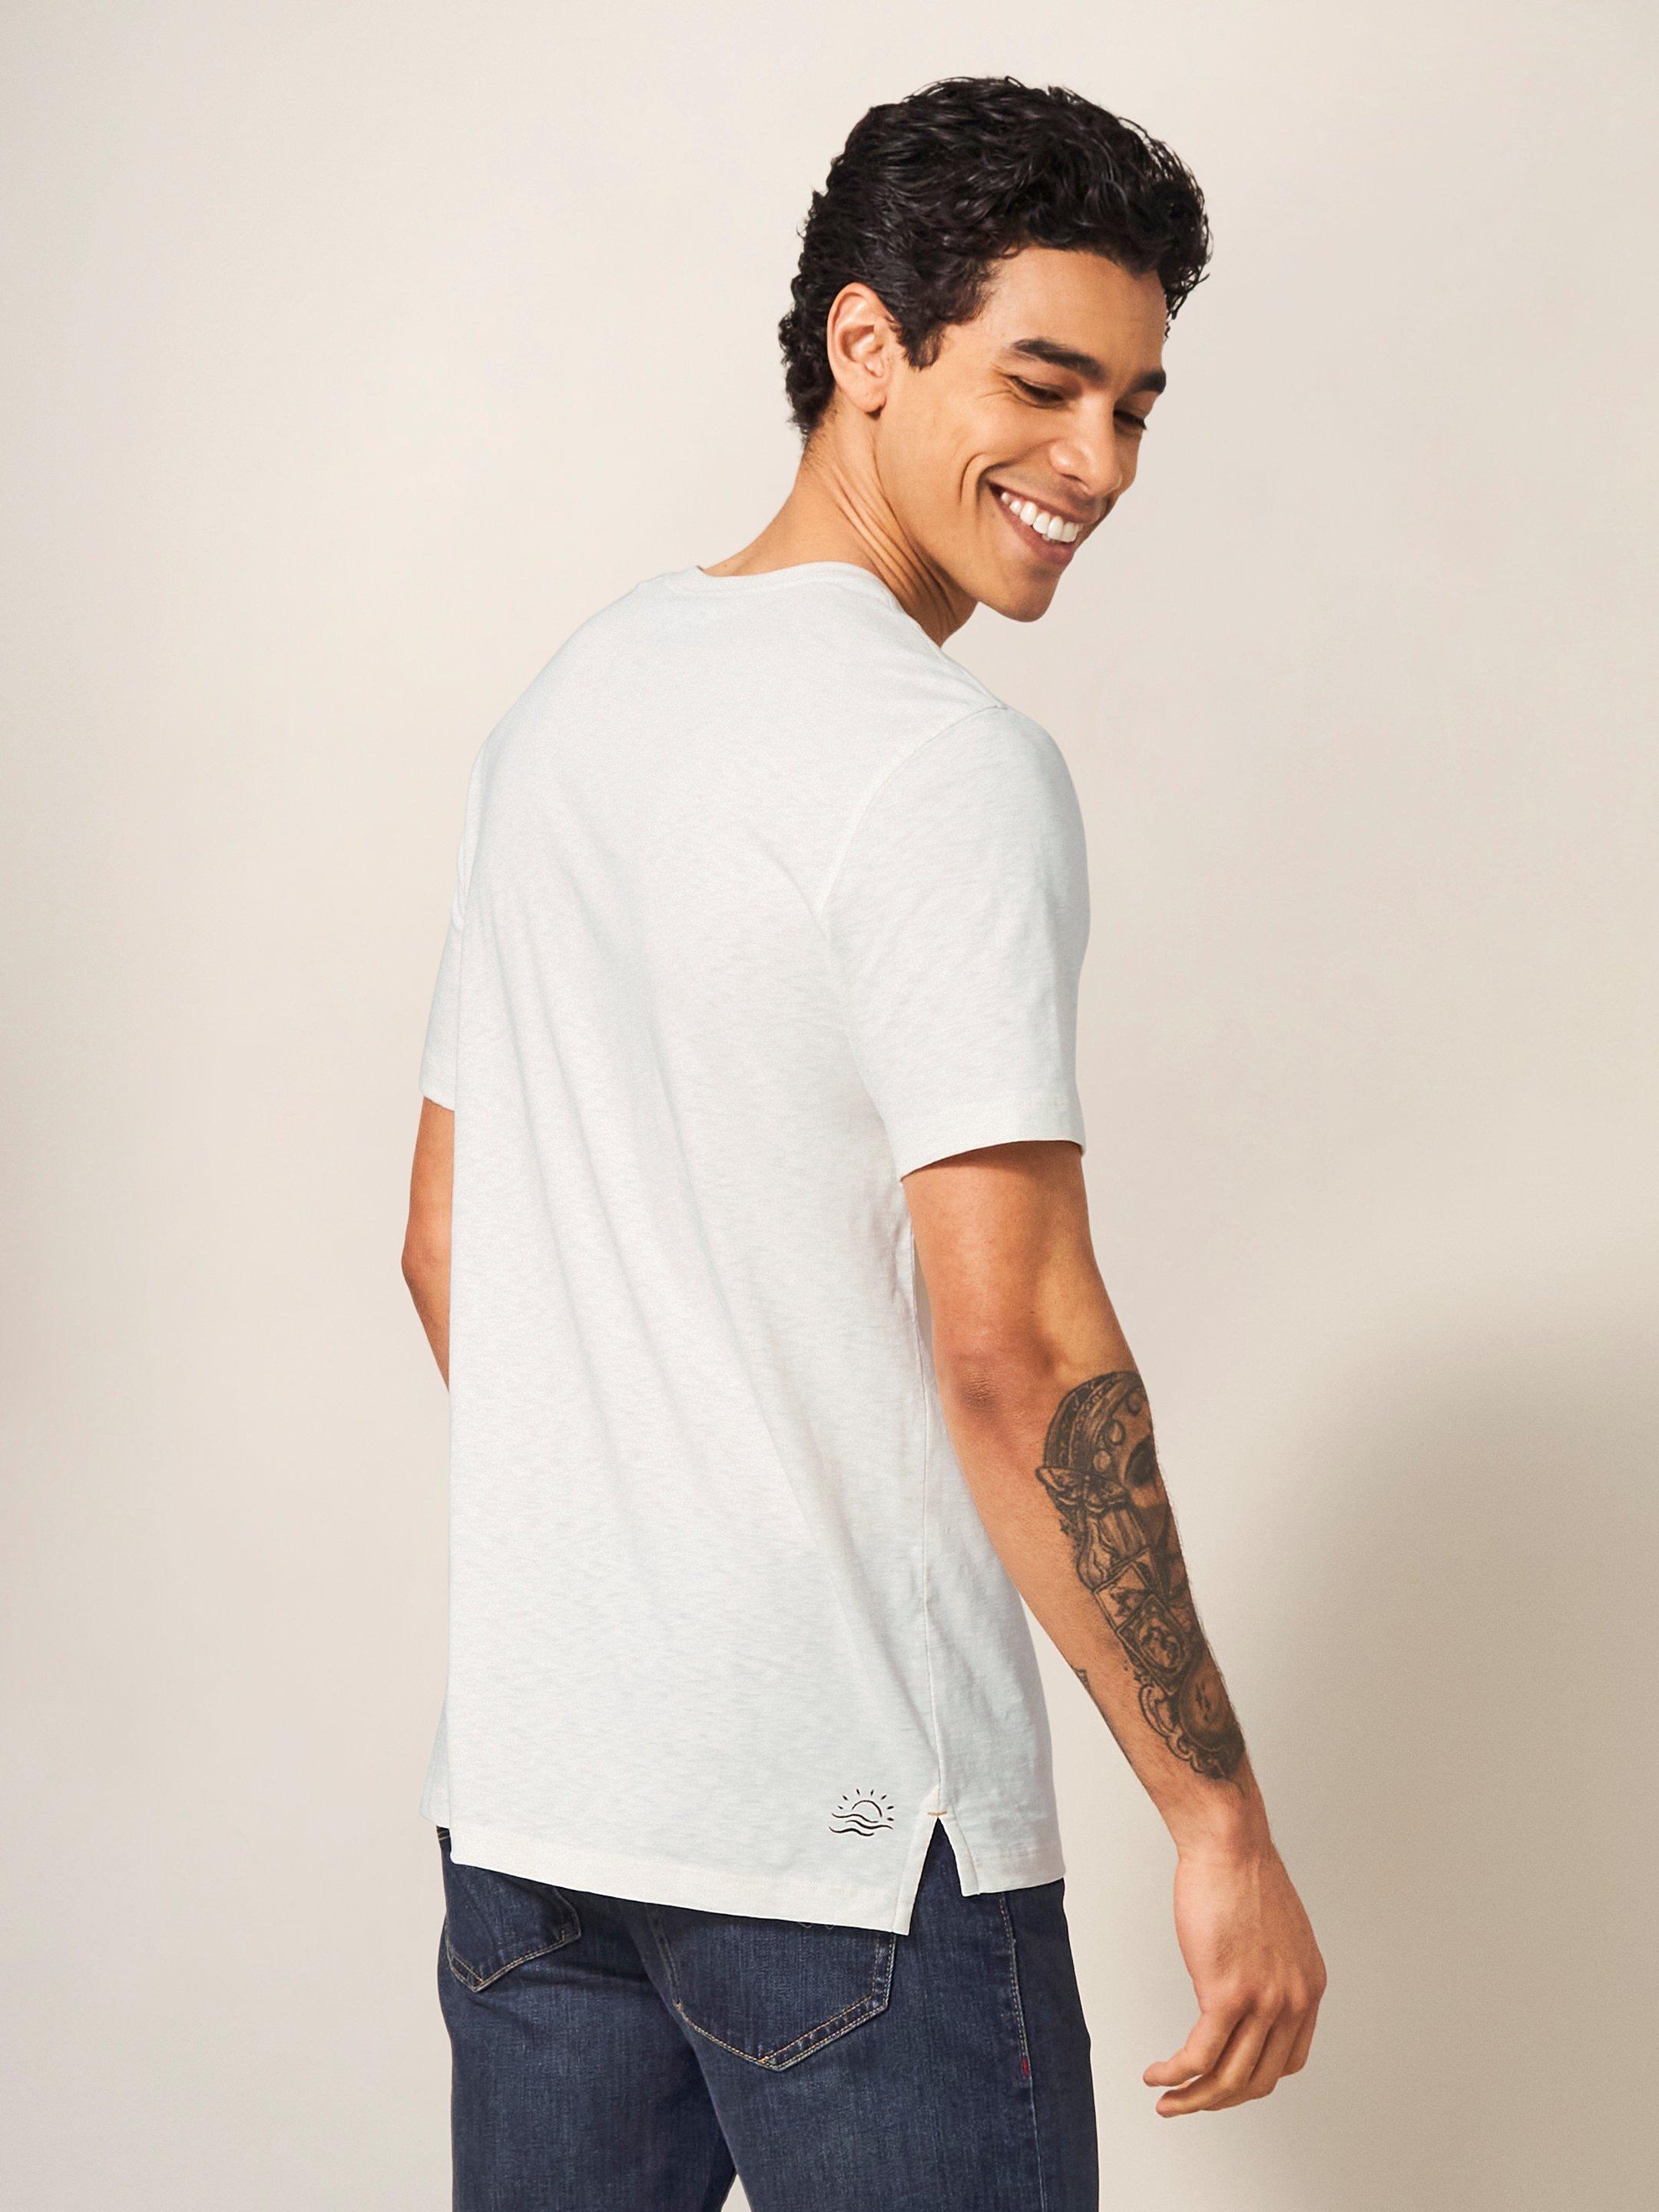 Fish Surfboard Graphic Tee in NAT WHITE - MODEL BACK